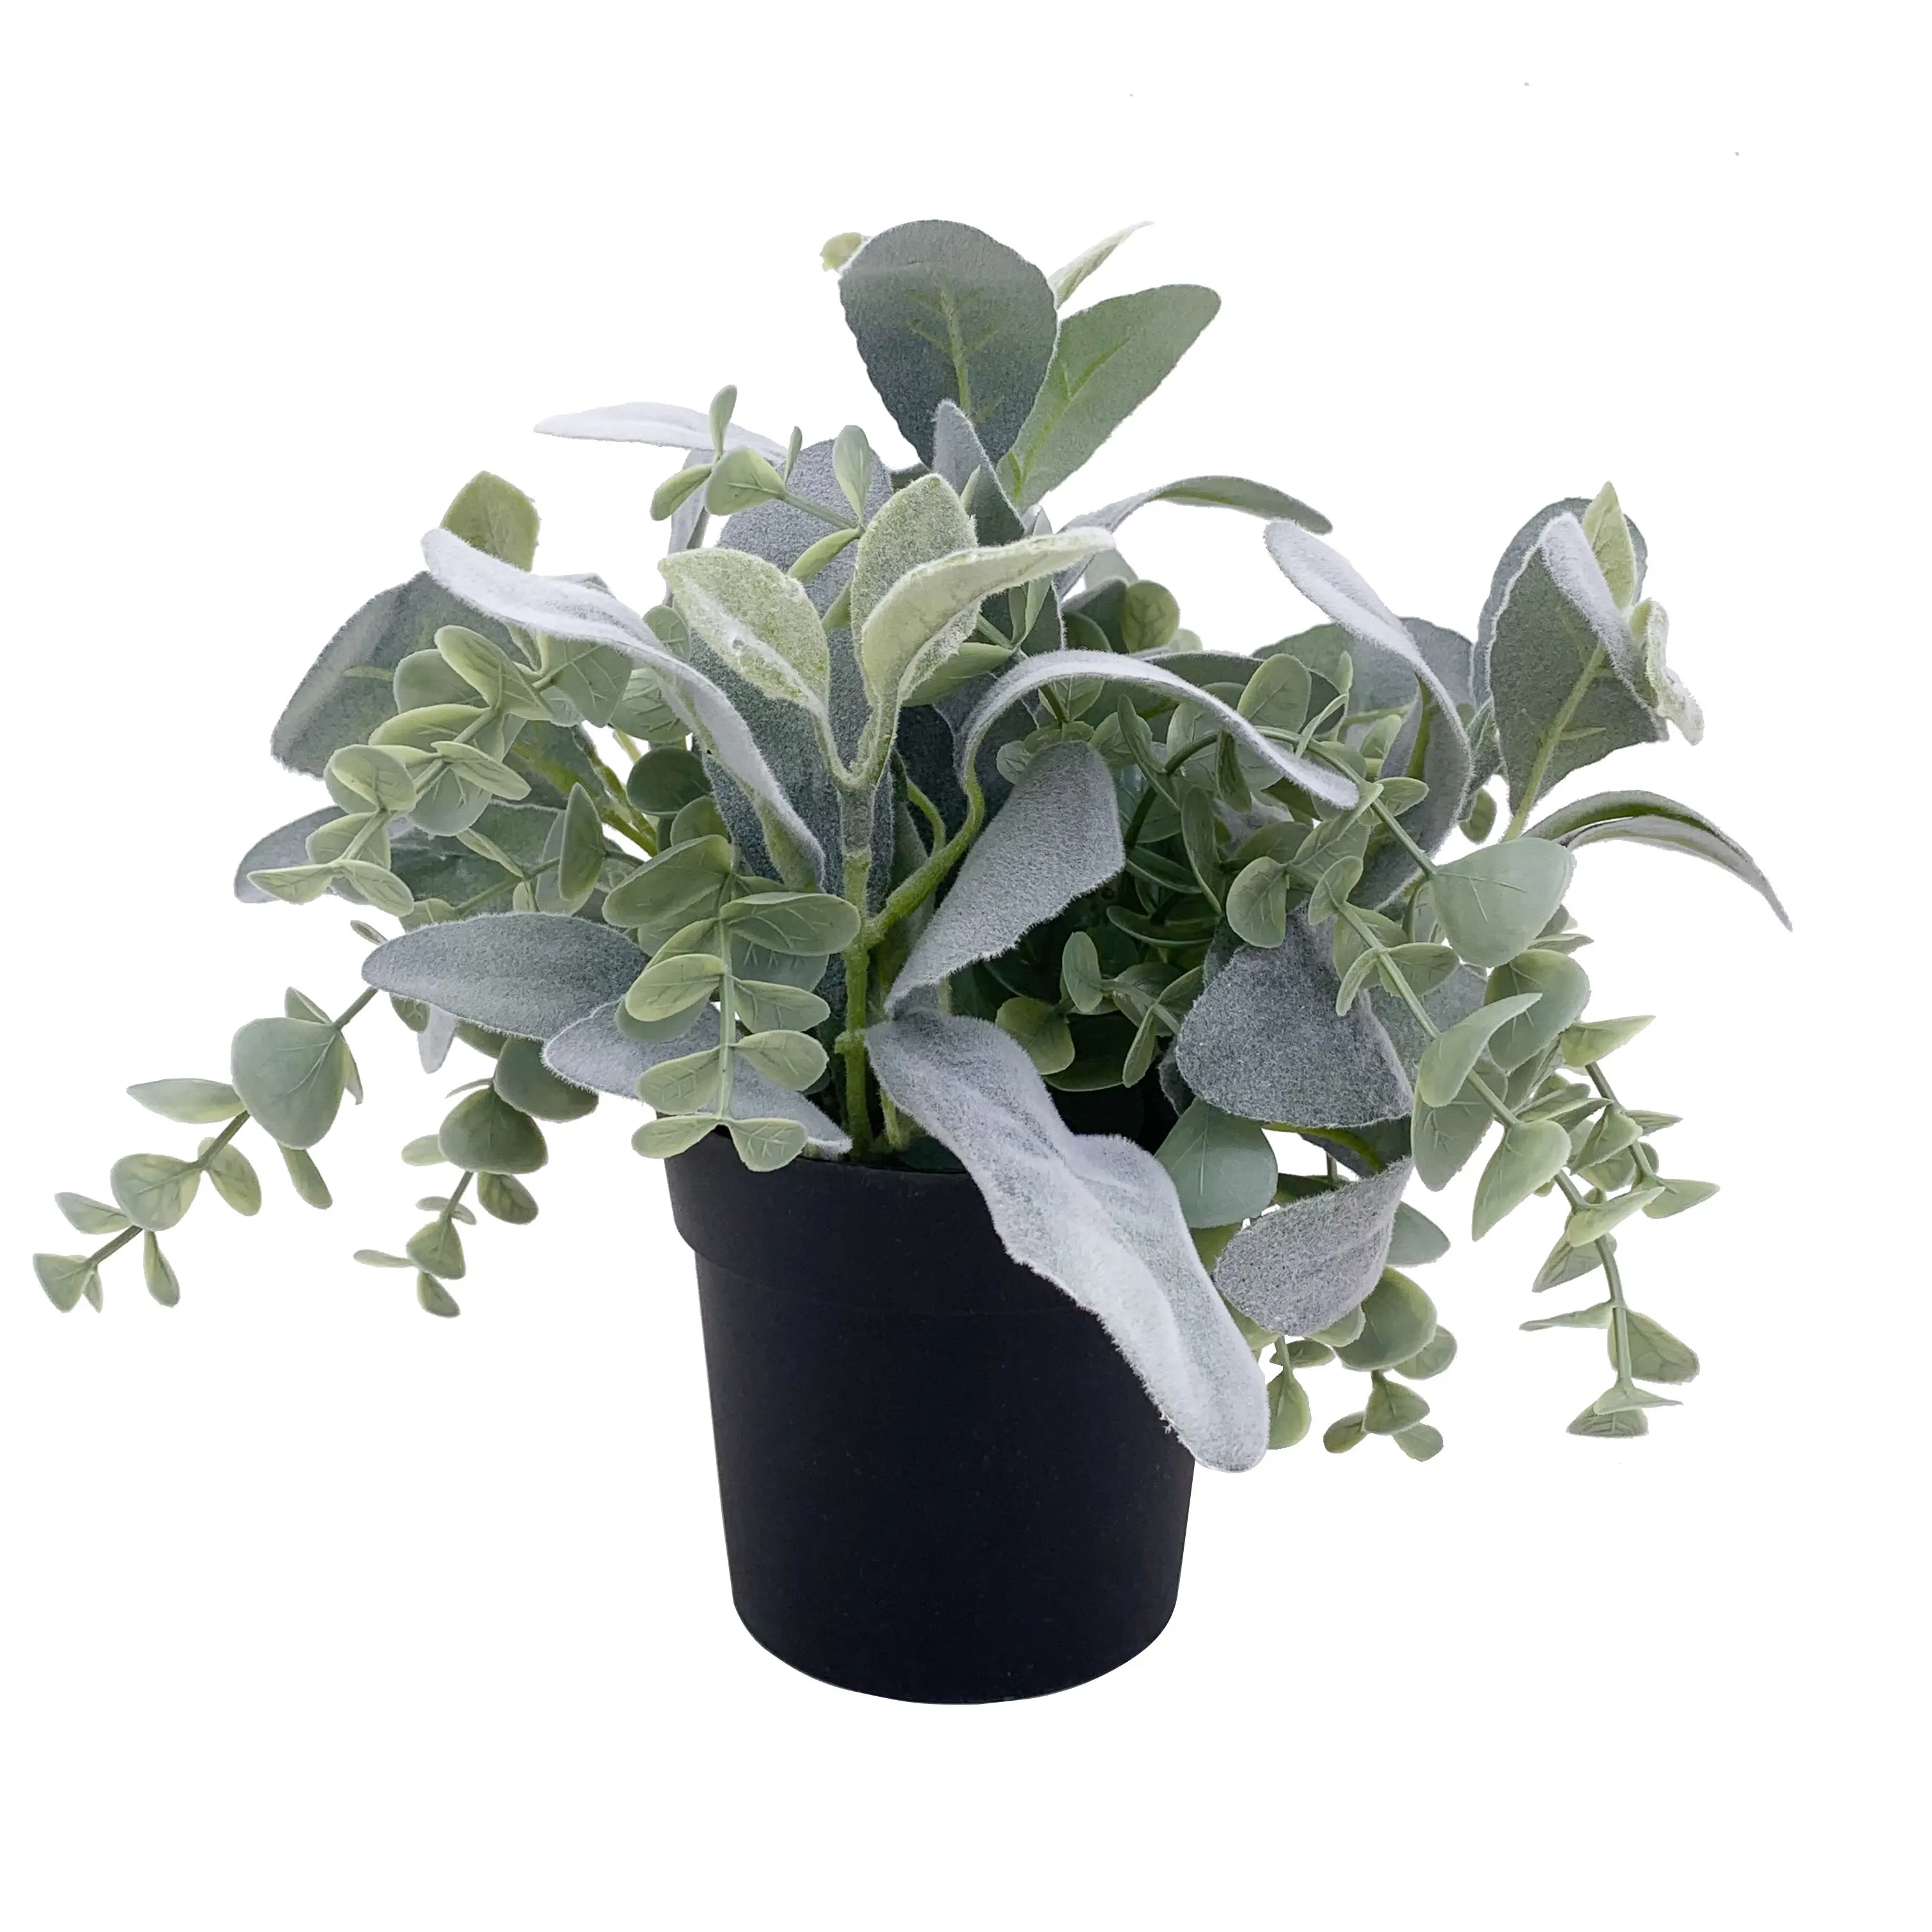 Wholesale green Fake plant Ainsliaea Department stores Casual in black pots plastic indoor and outdoor